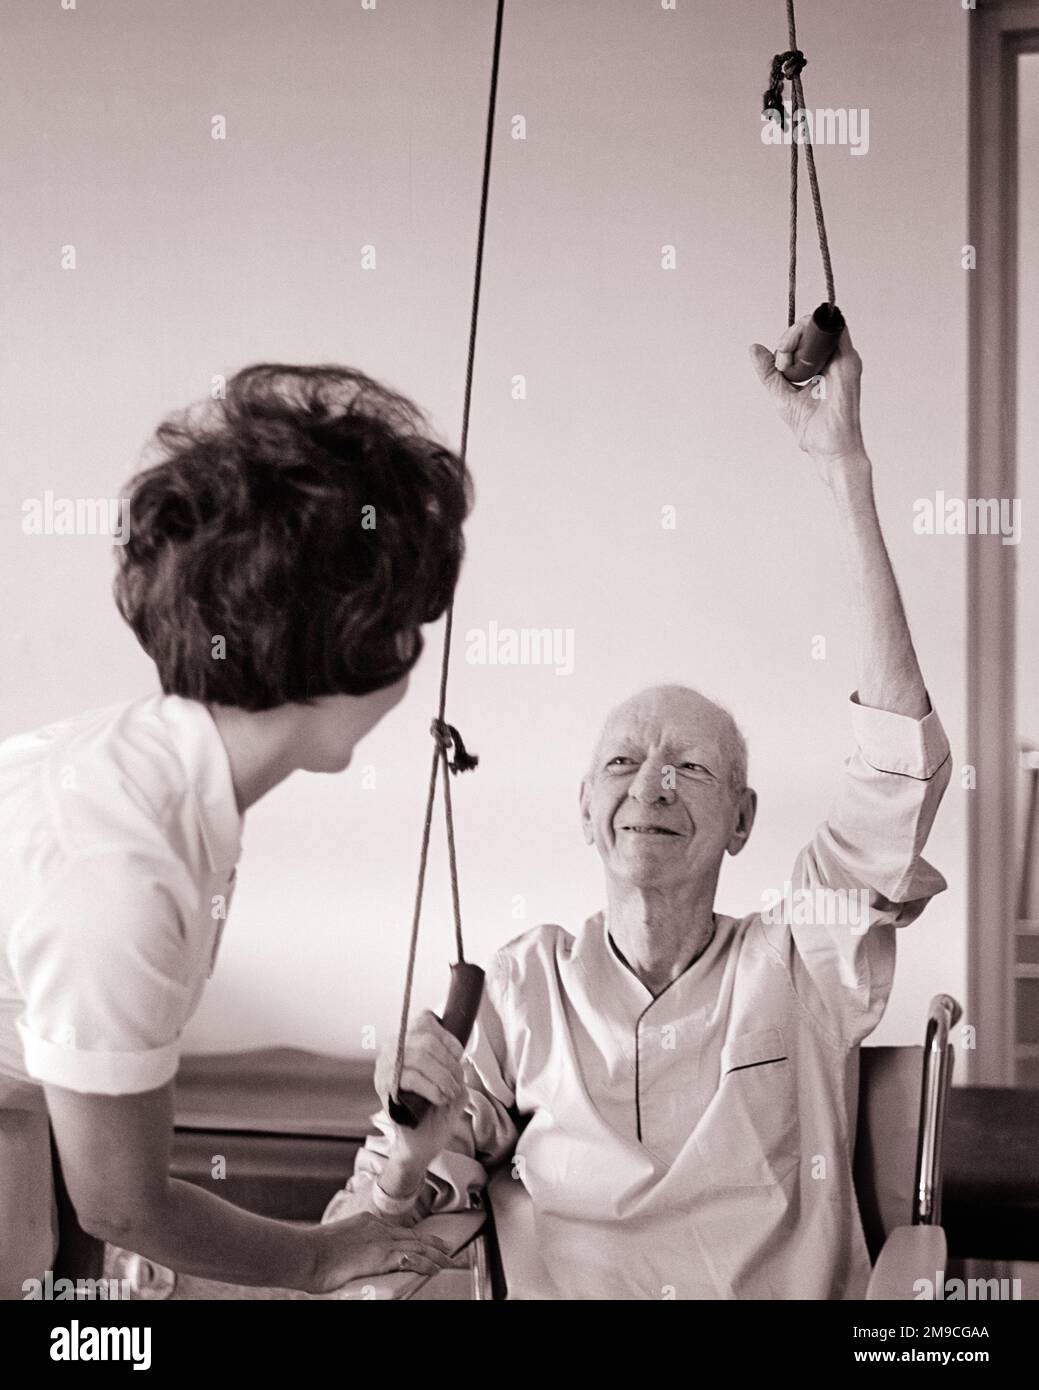 1960s NURSE PHYSICAL THERAPIST HELPING A SENIOR MAN WITH PULLEY EXERCISES TO REHAB HIS UPPER BODY AND SHOULDER STRENGTH - m8487 HAR001 HARS BALANCE NURSING SAFETY TEAMWORK LIFESTYLE ELDER FEMALES COPY SPACE HALF-LENGTH LADIES PERSONS INSPIRATION CARING MALES SENIOR MAN SENIOR ADULT PULLEY B&W GOALS HEALTHCARE SUCCESS ACTIVITY OCCUPATION PHYSICAL OLD AGE OLDSTERS PROVIDER OLDSTER PROVIDERS HIS PRACTITIONERS PROTECTION STRENGTH HEALING AND UPPER HEALTH CARE EXERCISES OCCUPATIONS ELDERS CONNECTION HEALER REHAB FLEXIBILITY HOSPITALS MUSCLES PRACTITIONER SUPPORT FACILITY FACILITIES COOPERATION Stock Photo